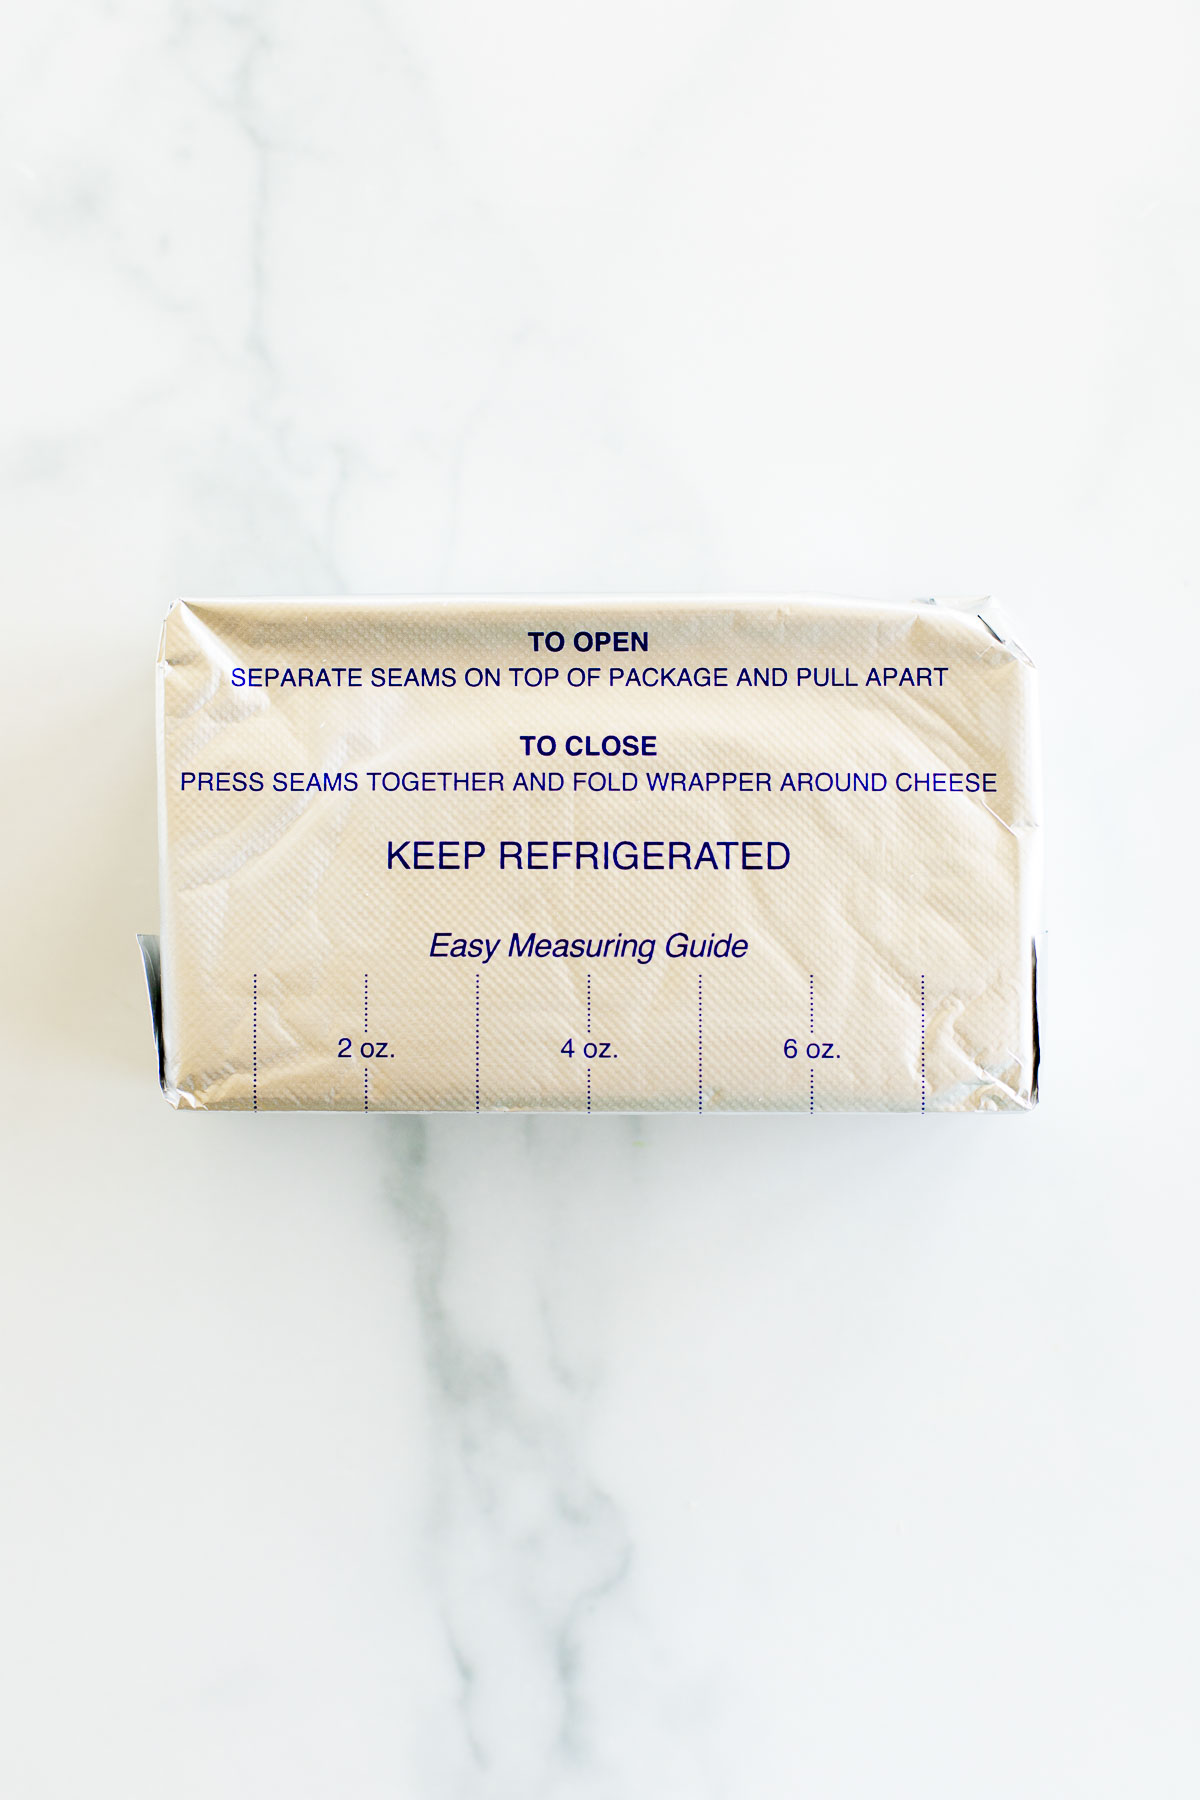 A block of cream cheese in a gold foil wrapper with opening instructions and a measuring guide, along with tips on how to freeze, printed on it.